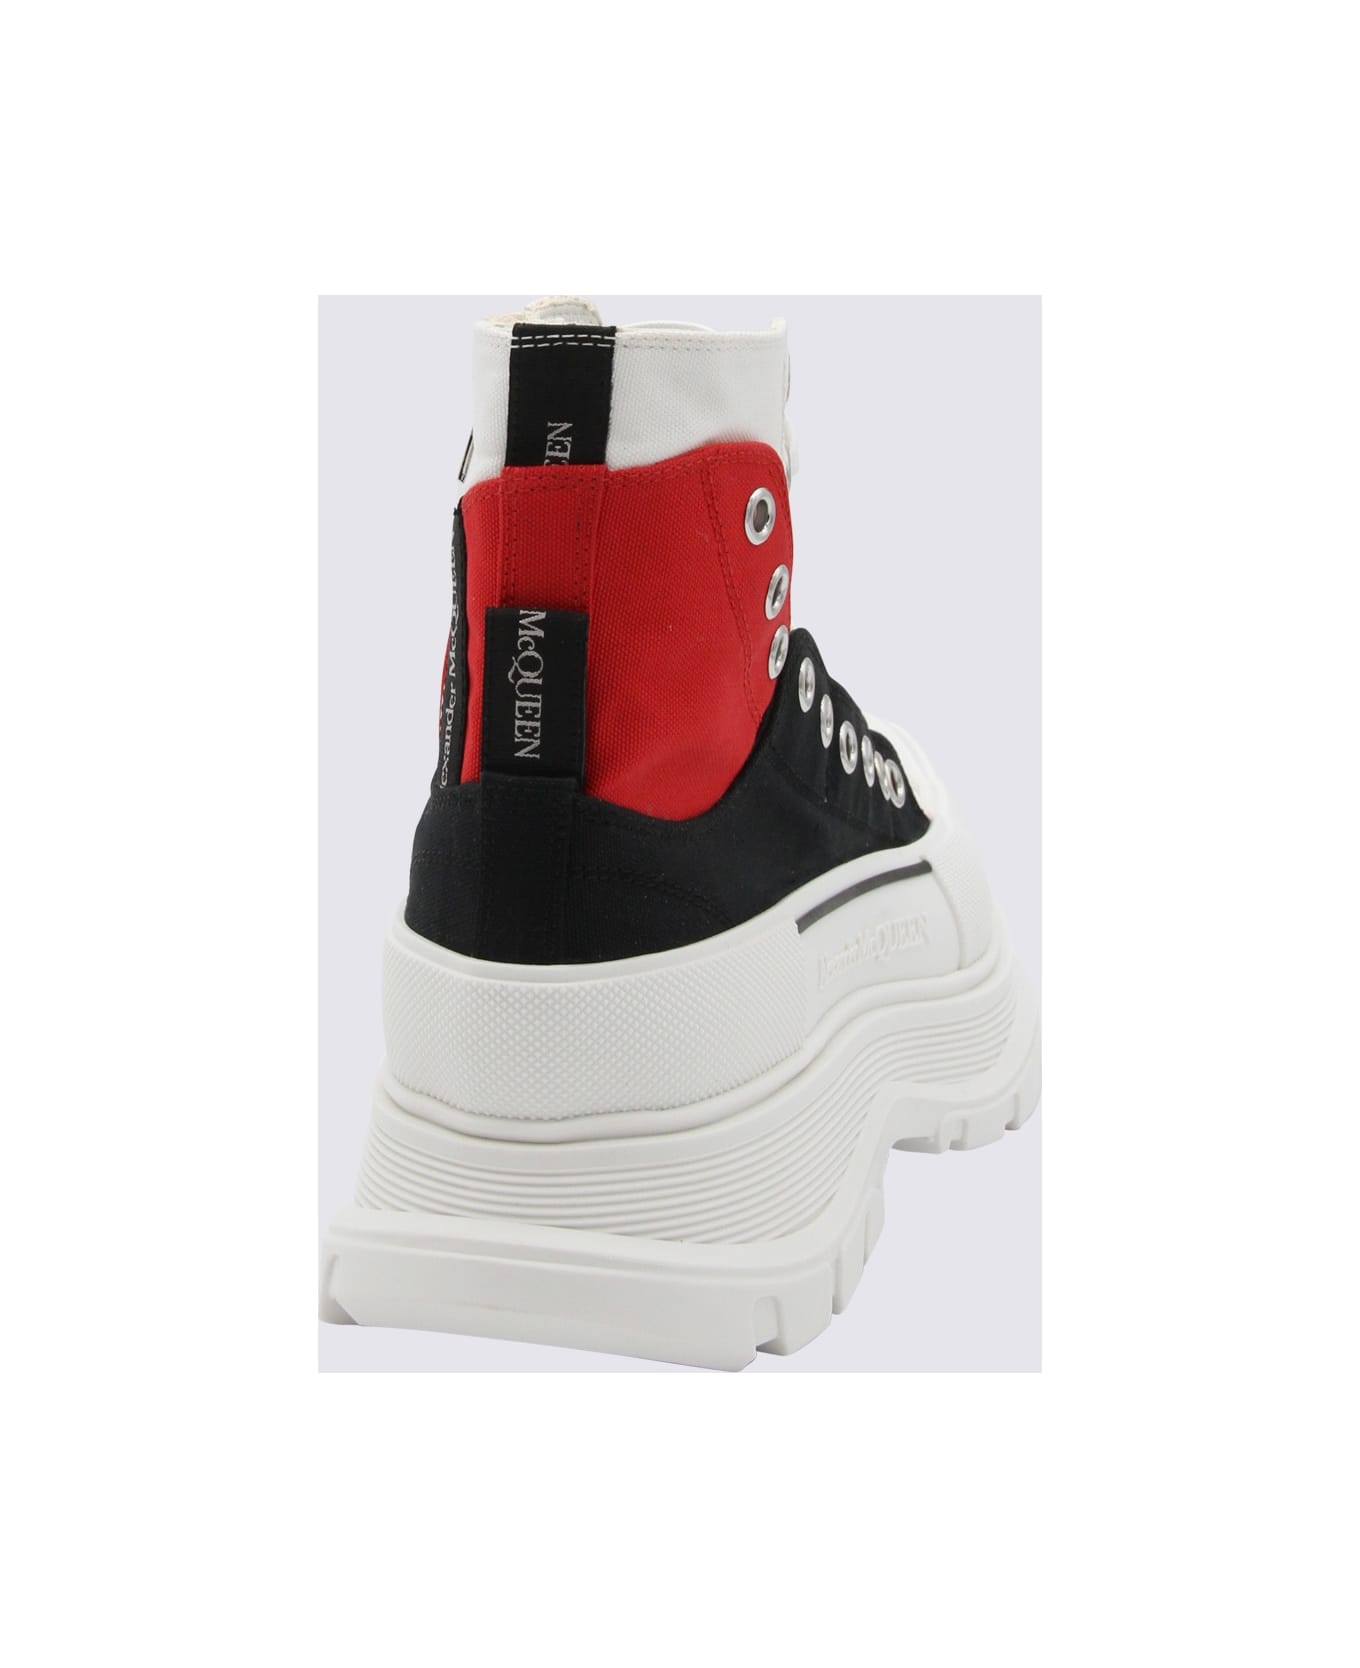 Alexander McQueen White Black And Red Canvas Boots - BLK/LR/WH